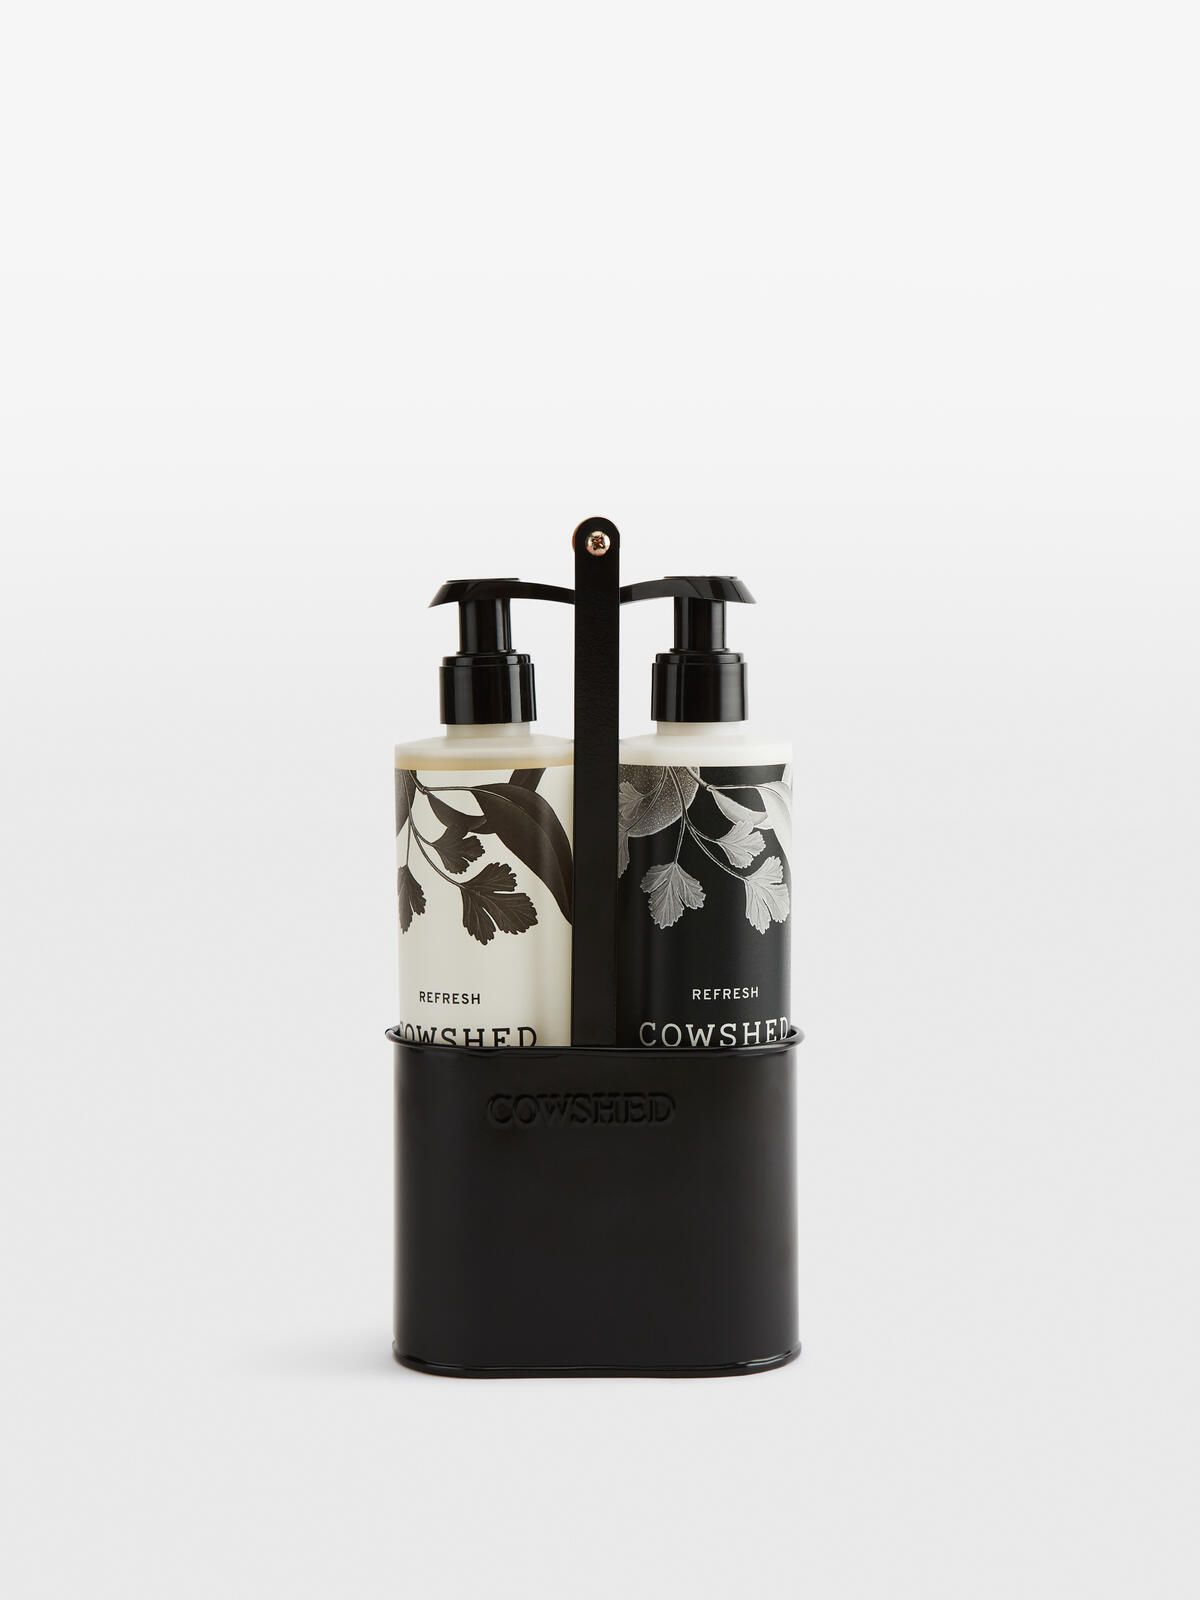 Cowshed Winter Hand Care Caddy | Soho Home Ltd